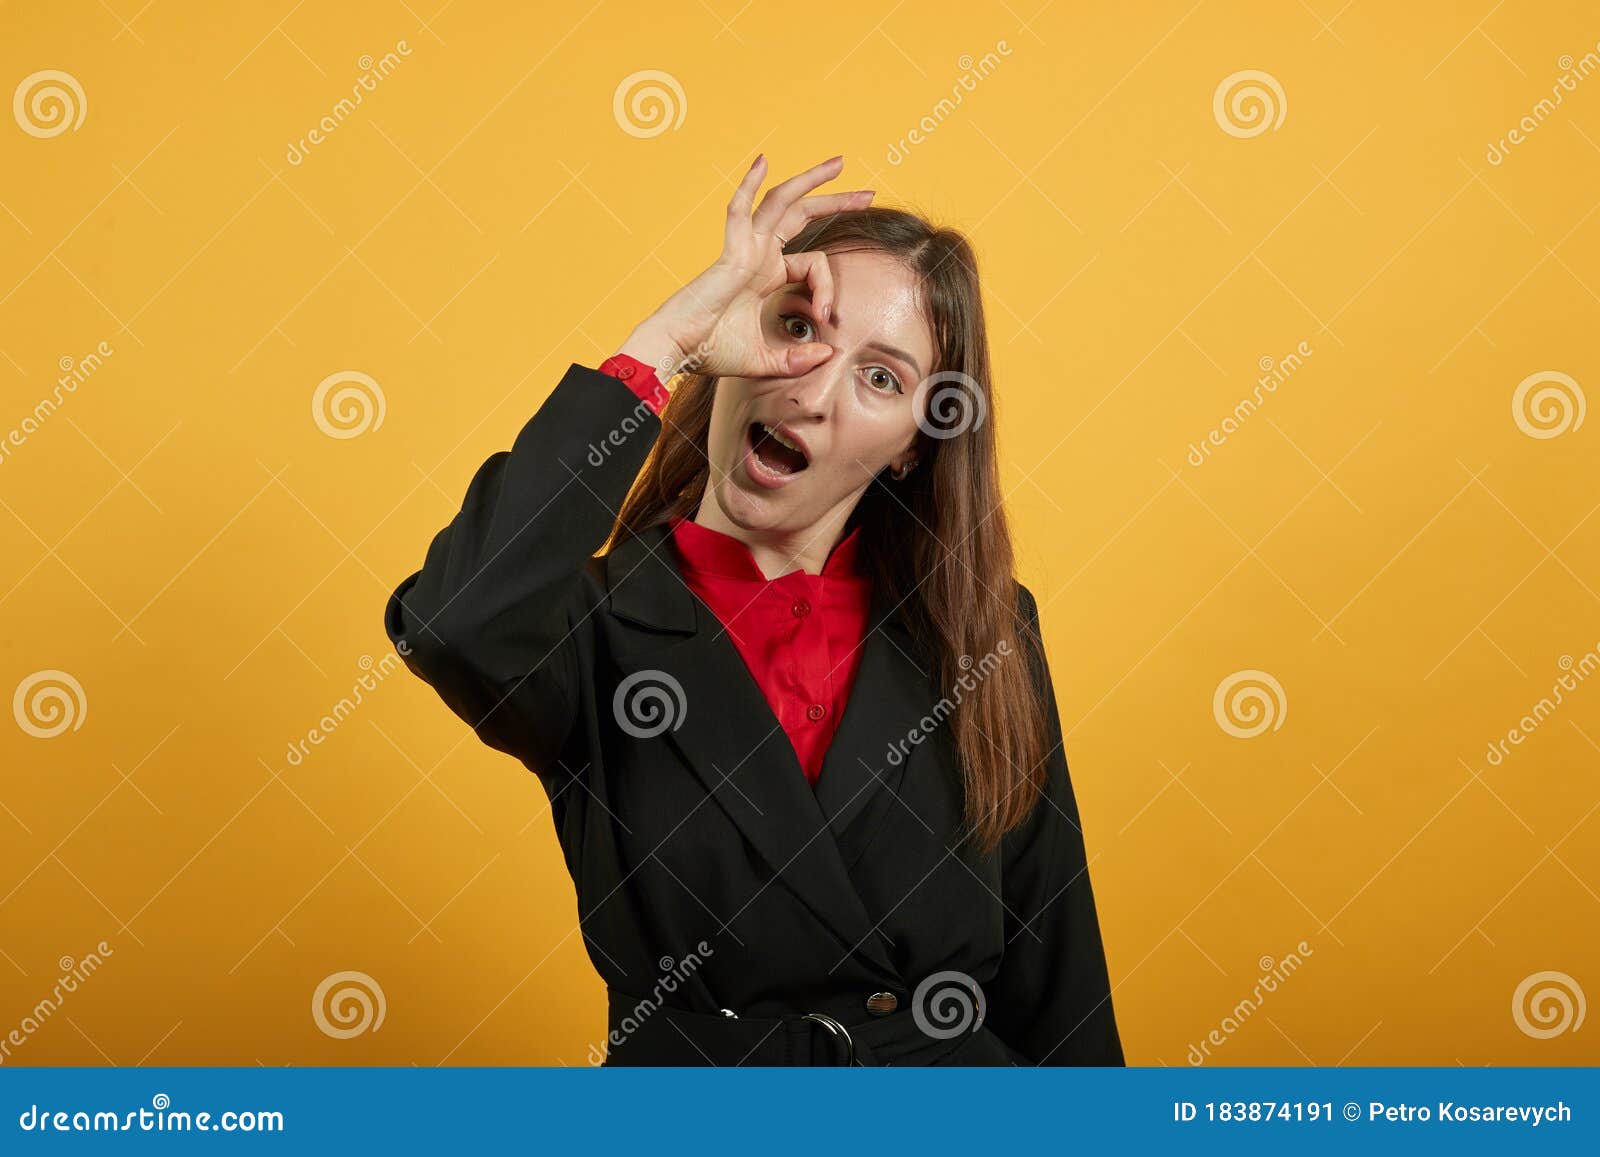 cheerful woman holds fingers to eye as a sign that everything is ok with her.